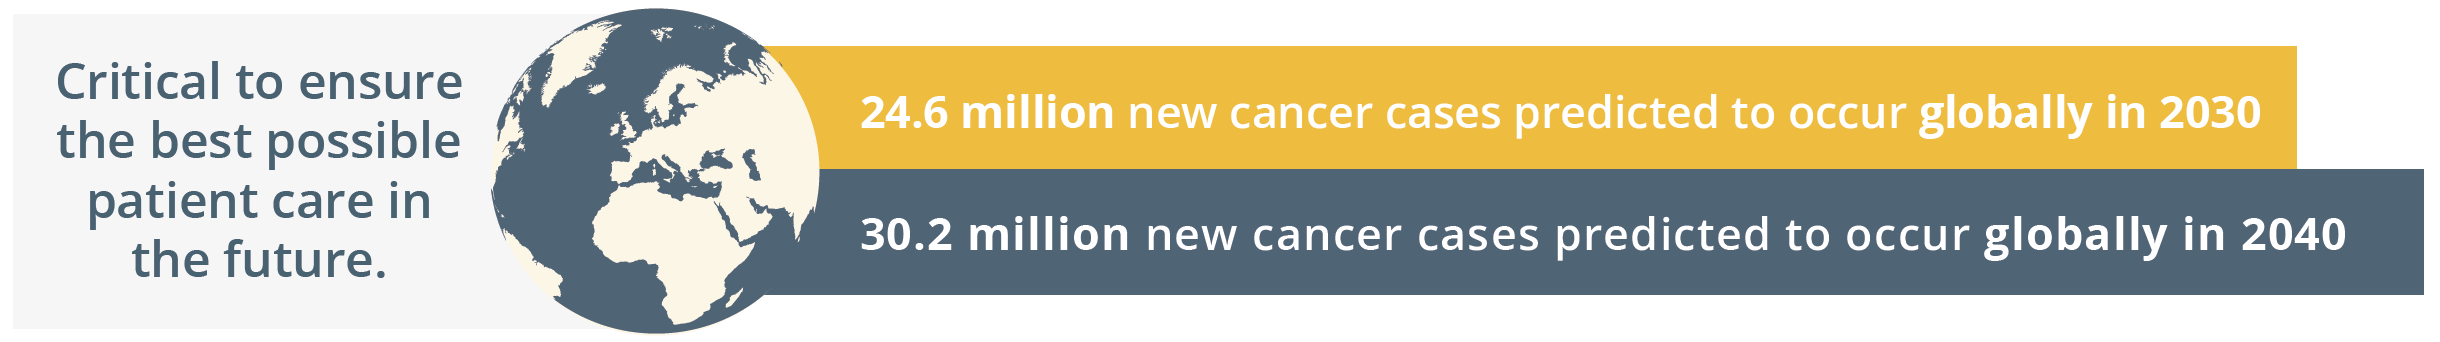 24.6 and 30.2 million new cancer cases predicted globally by 2030 and 2040, respectively